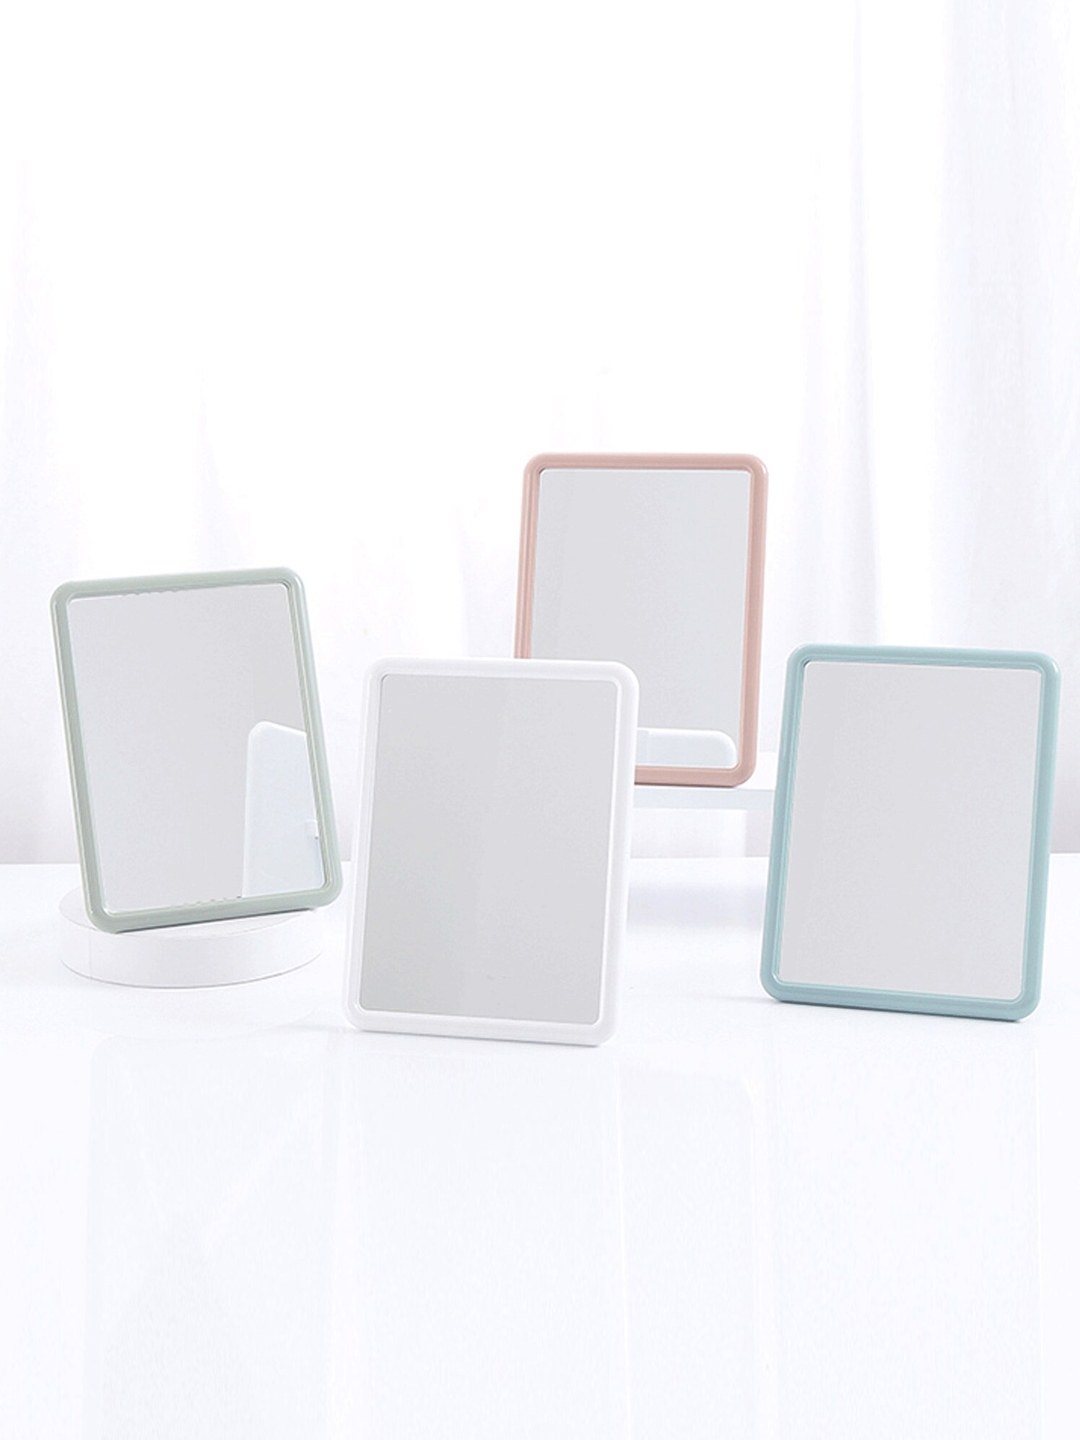 XIMI VOGUE Green & Blue Set Of 4 Standing Square-Shaped Table Top Mirrors